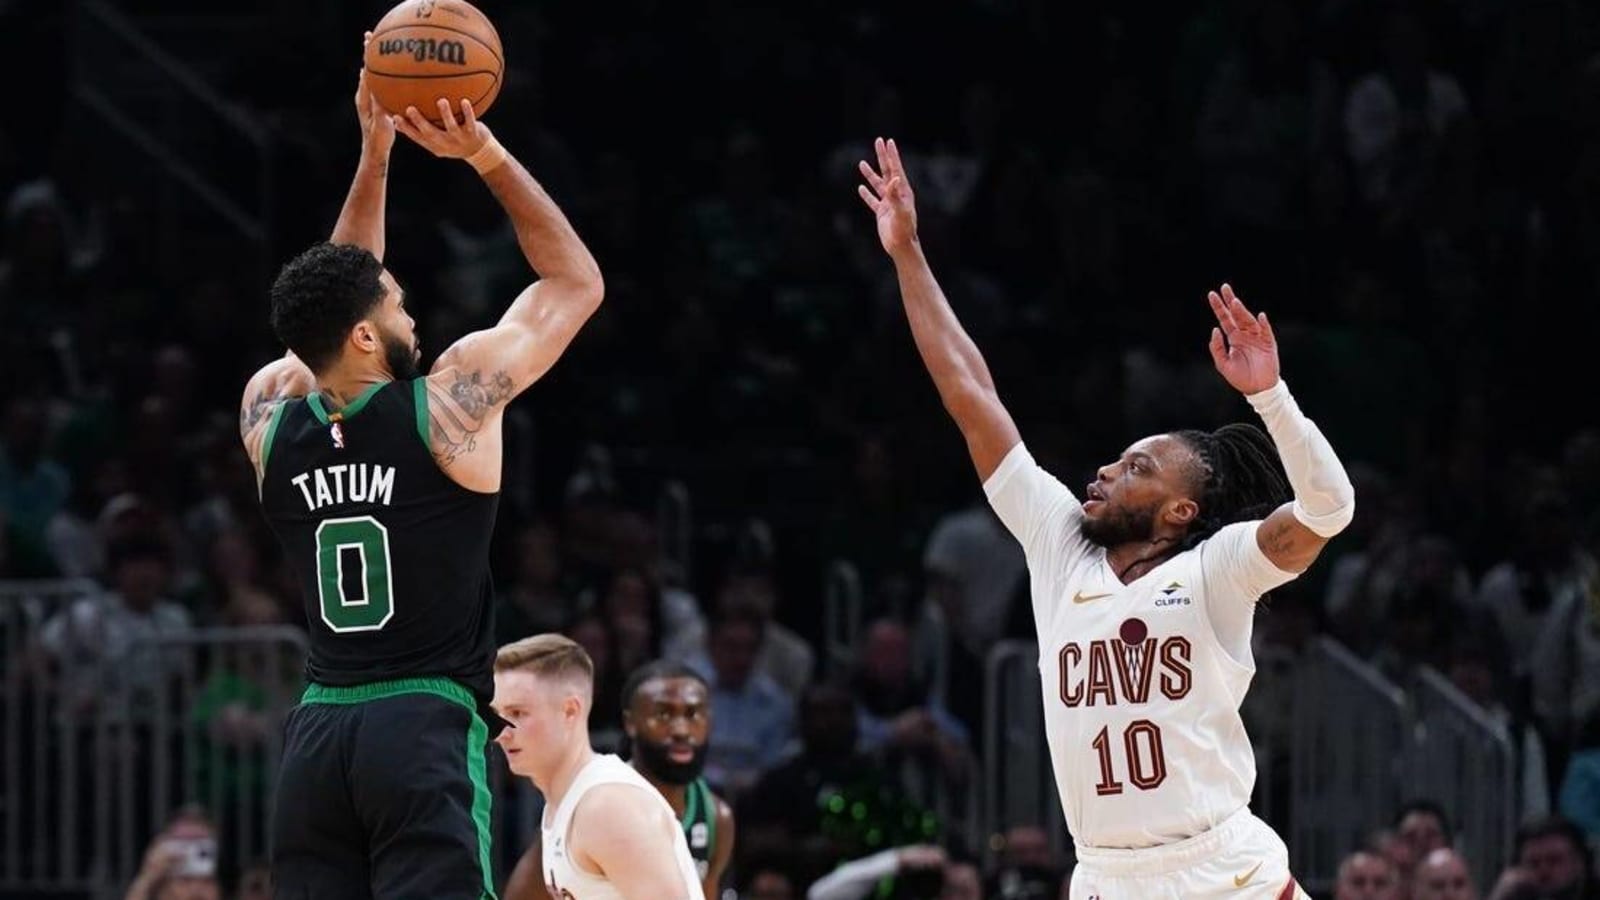 Celtics puts Cavs to bed, advance to Eastern Conference finals